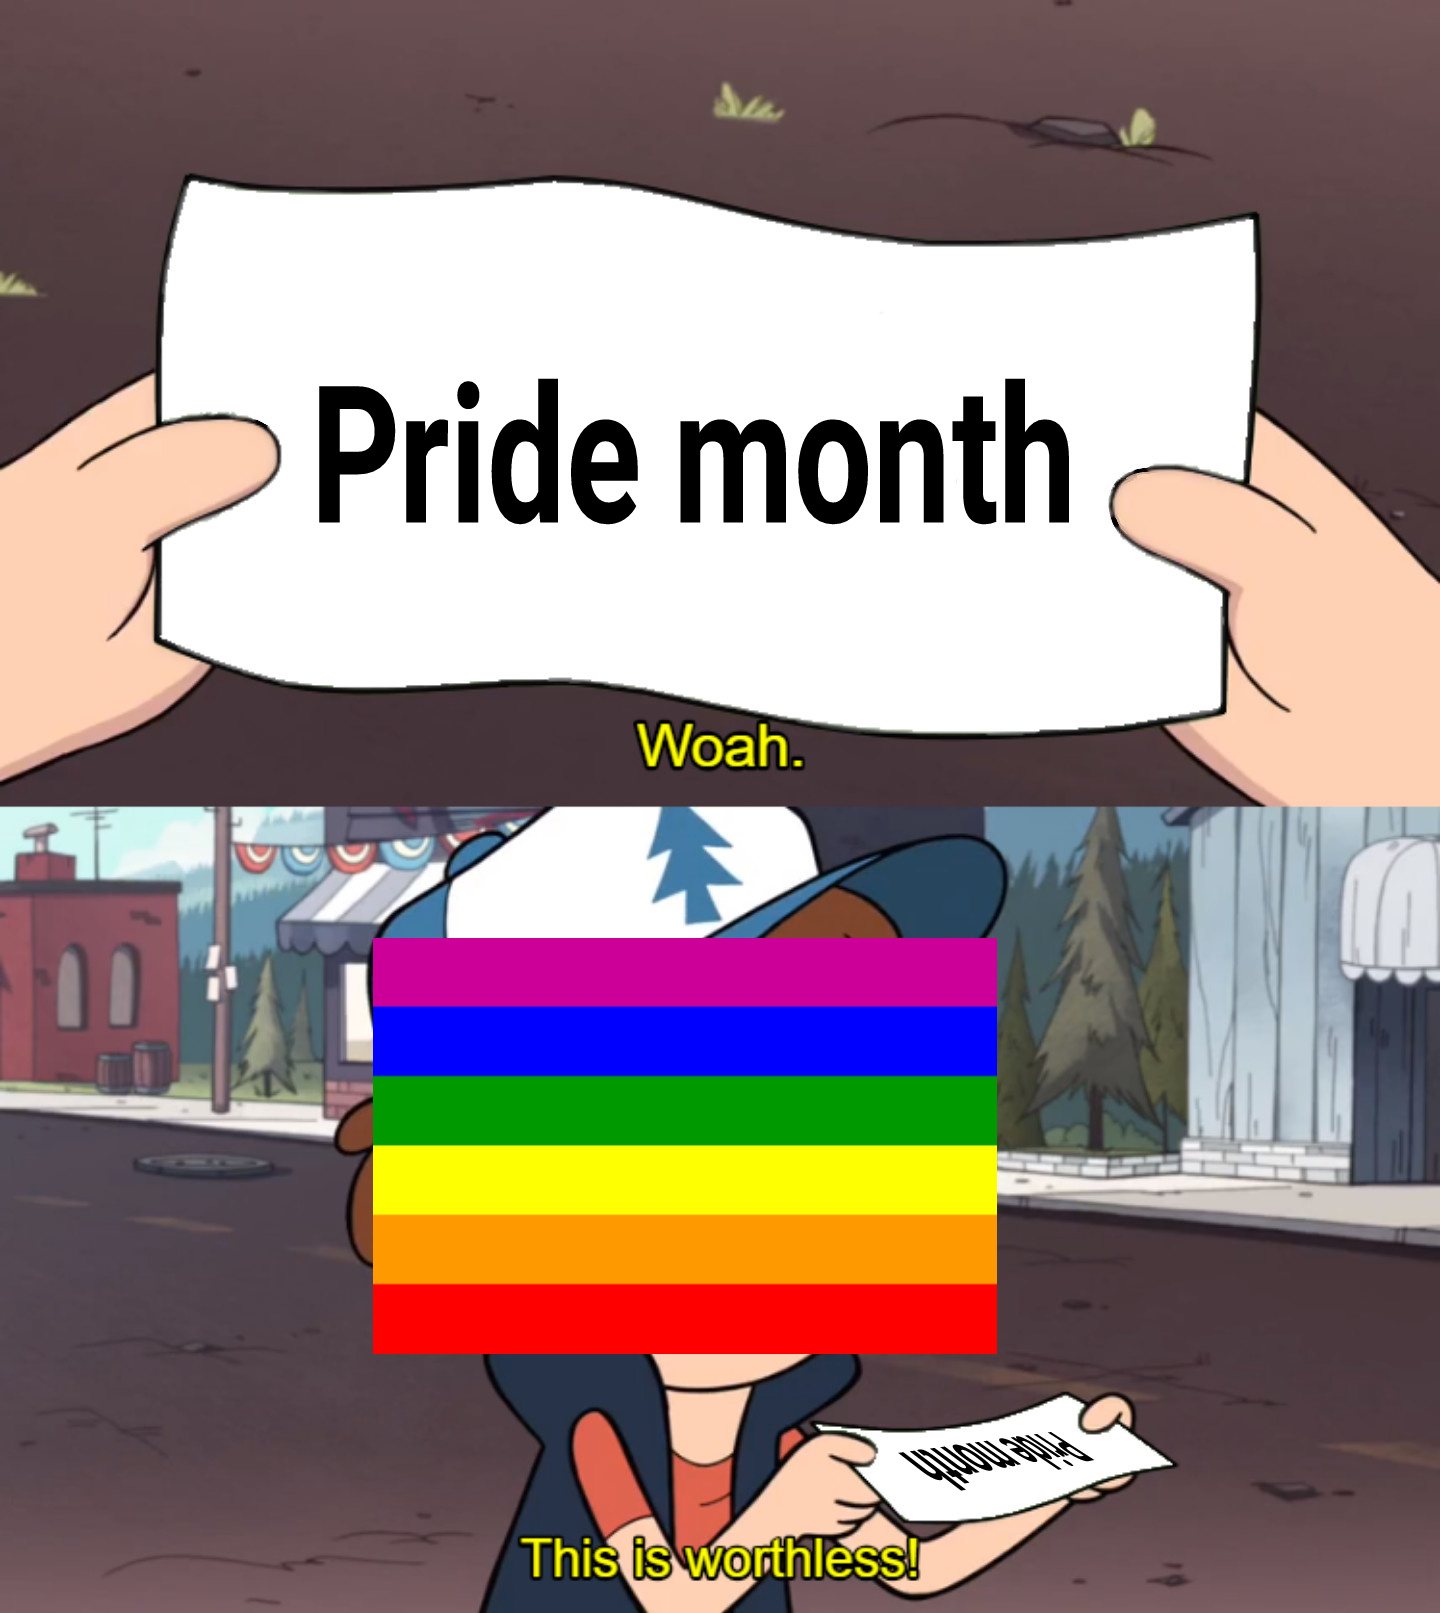 no homo,pride month is gay,fake and gay,fabricated and homosexual,mr.oxonib...